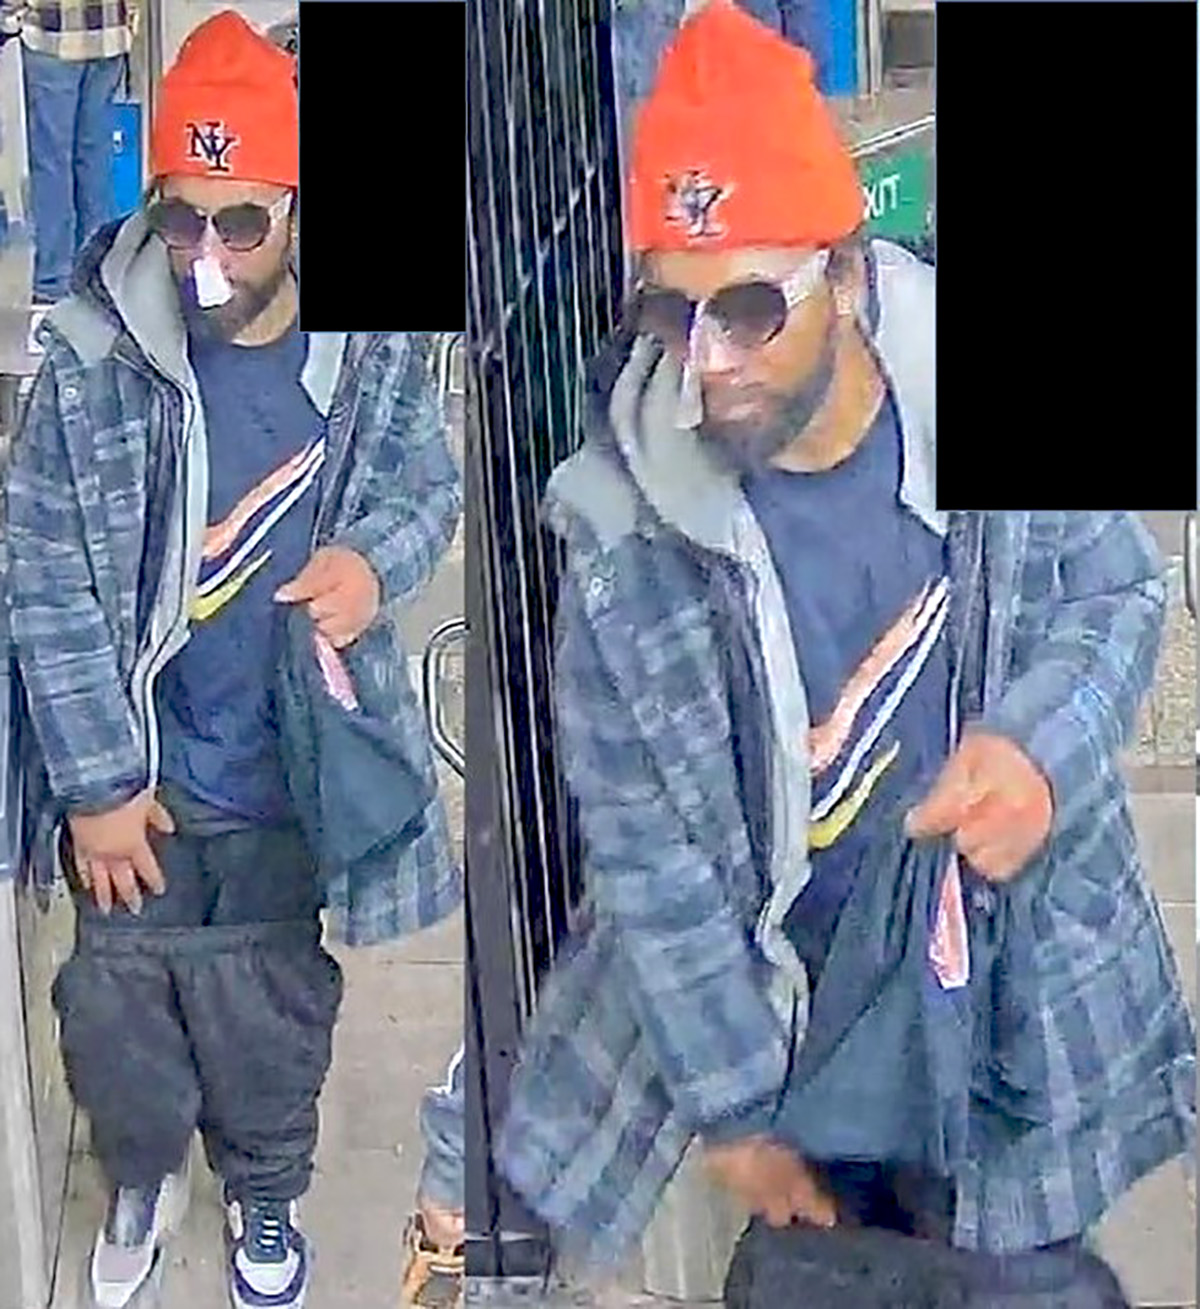 The NYPD is searching for this man in connection with an assault in which a straphanger was kicked onto the subway tracks. -Photo by NYPD